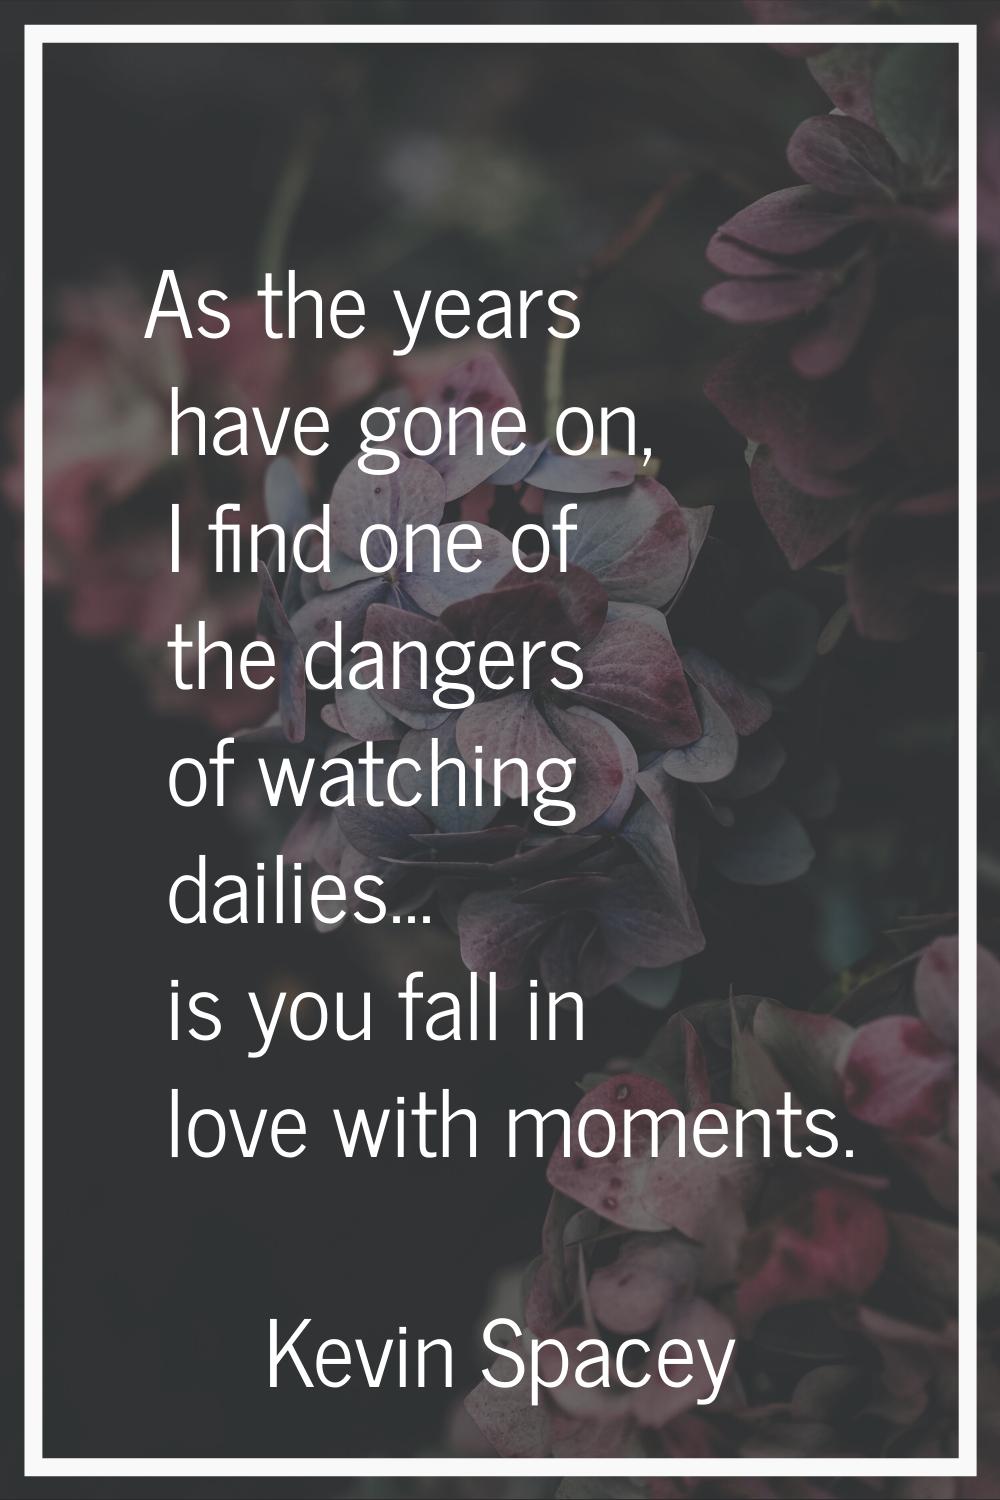 As the years have gone on, I find one of the dangers of watching dailies... is you fall in love wit